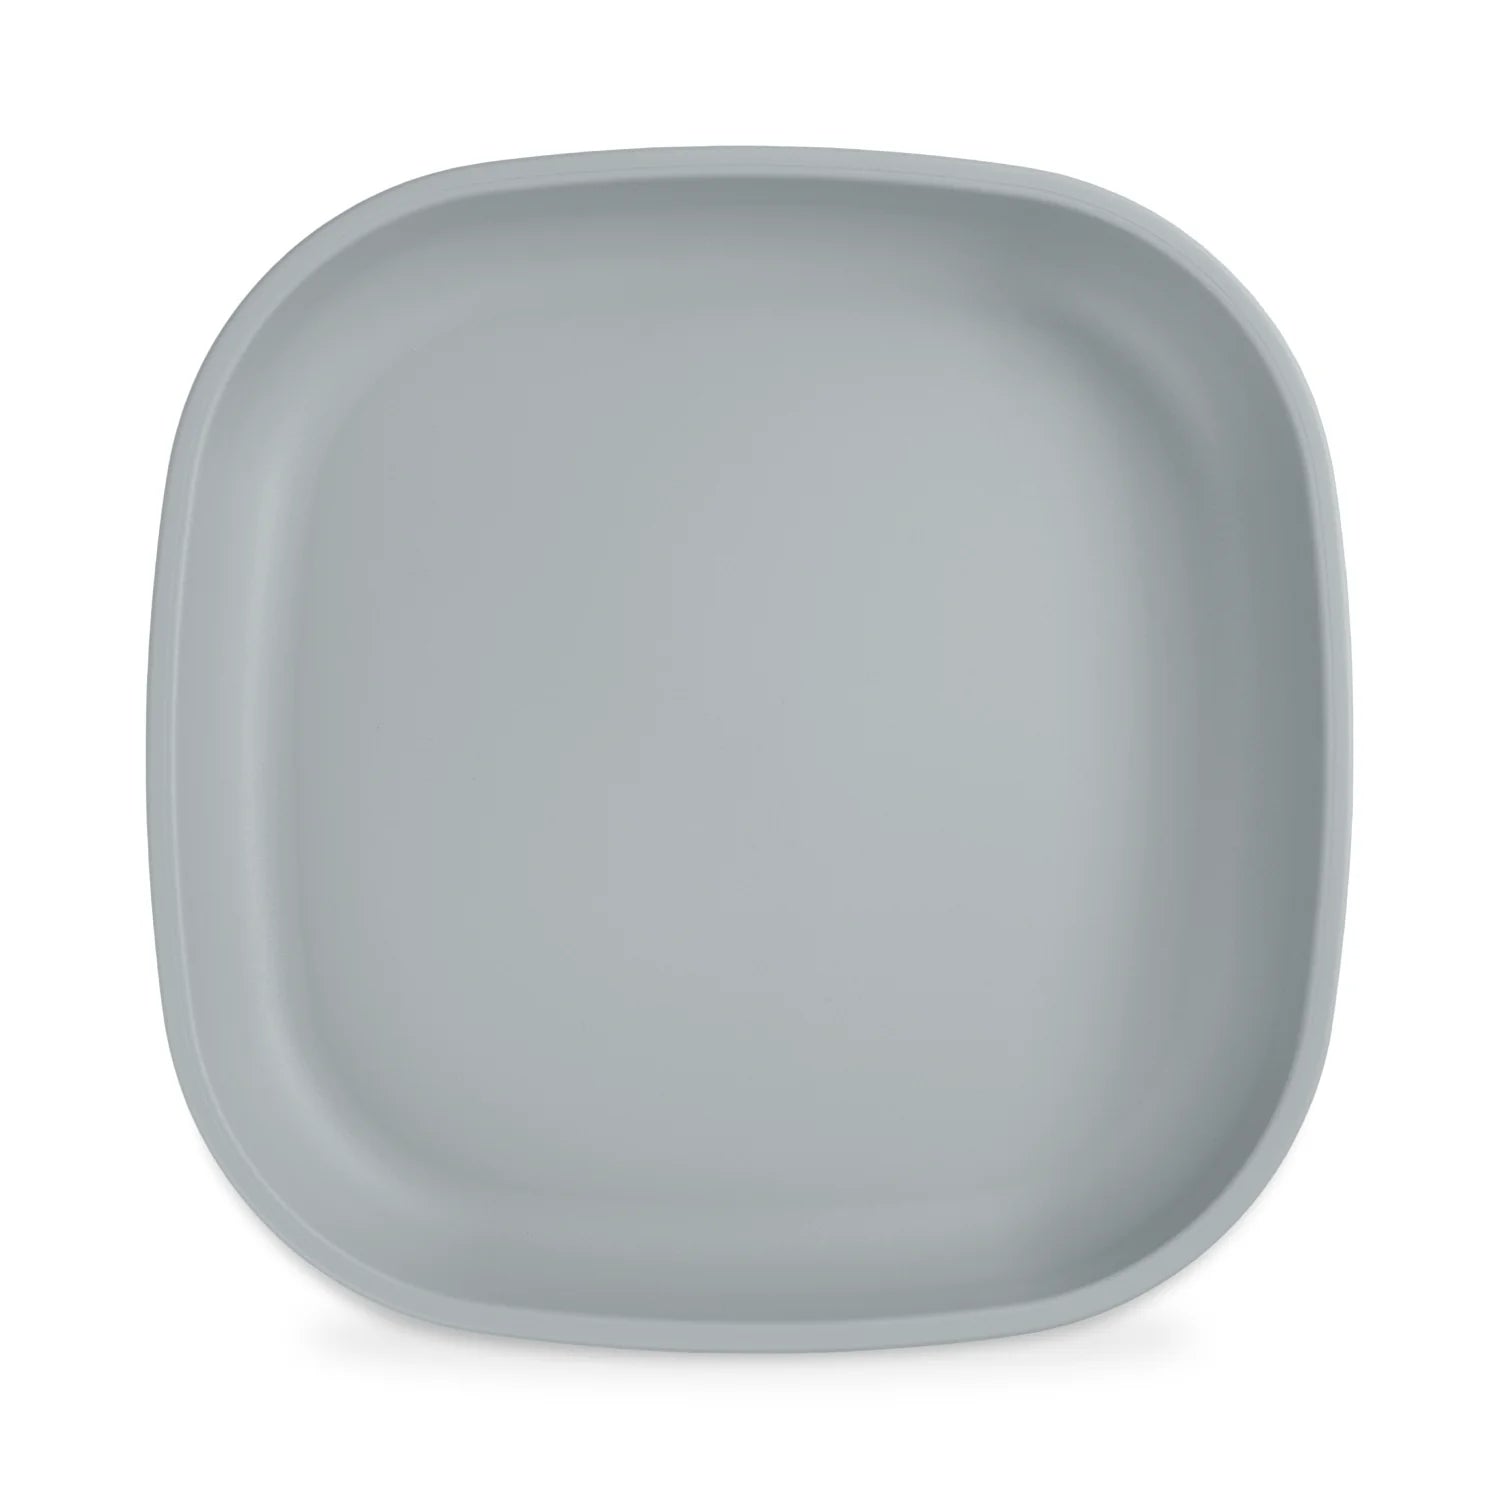 9" Flat Plate, Larger Size